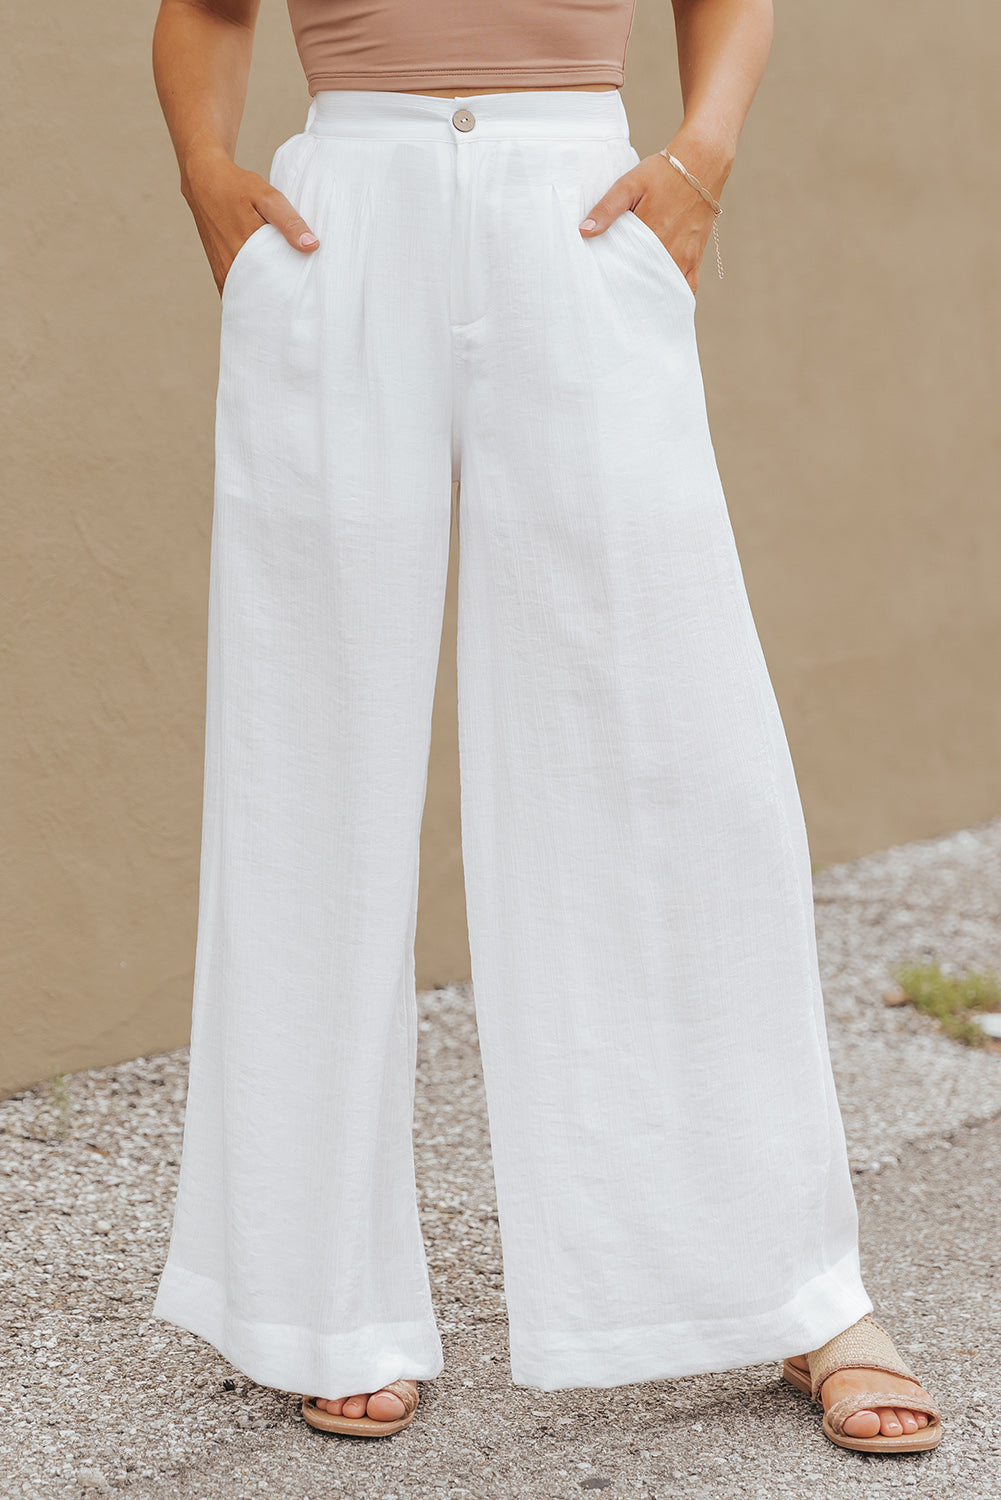 White Solid Color Elastic Waist Pleated Wide Leg Pants